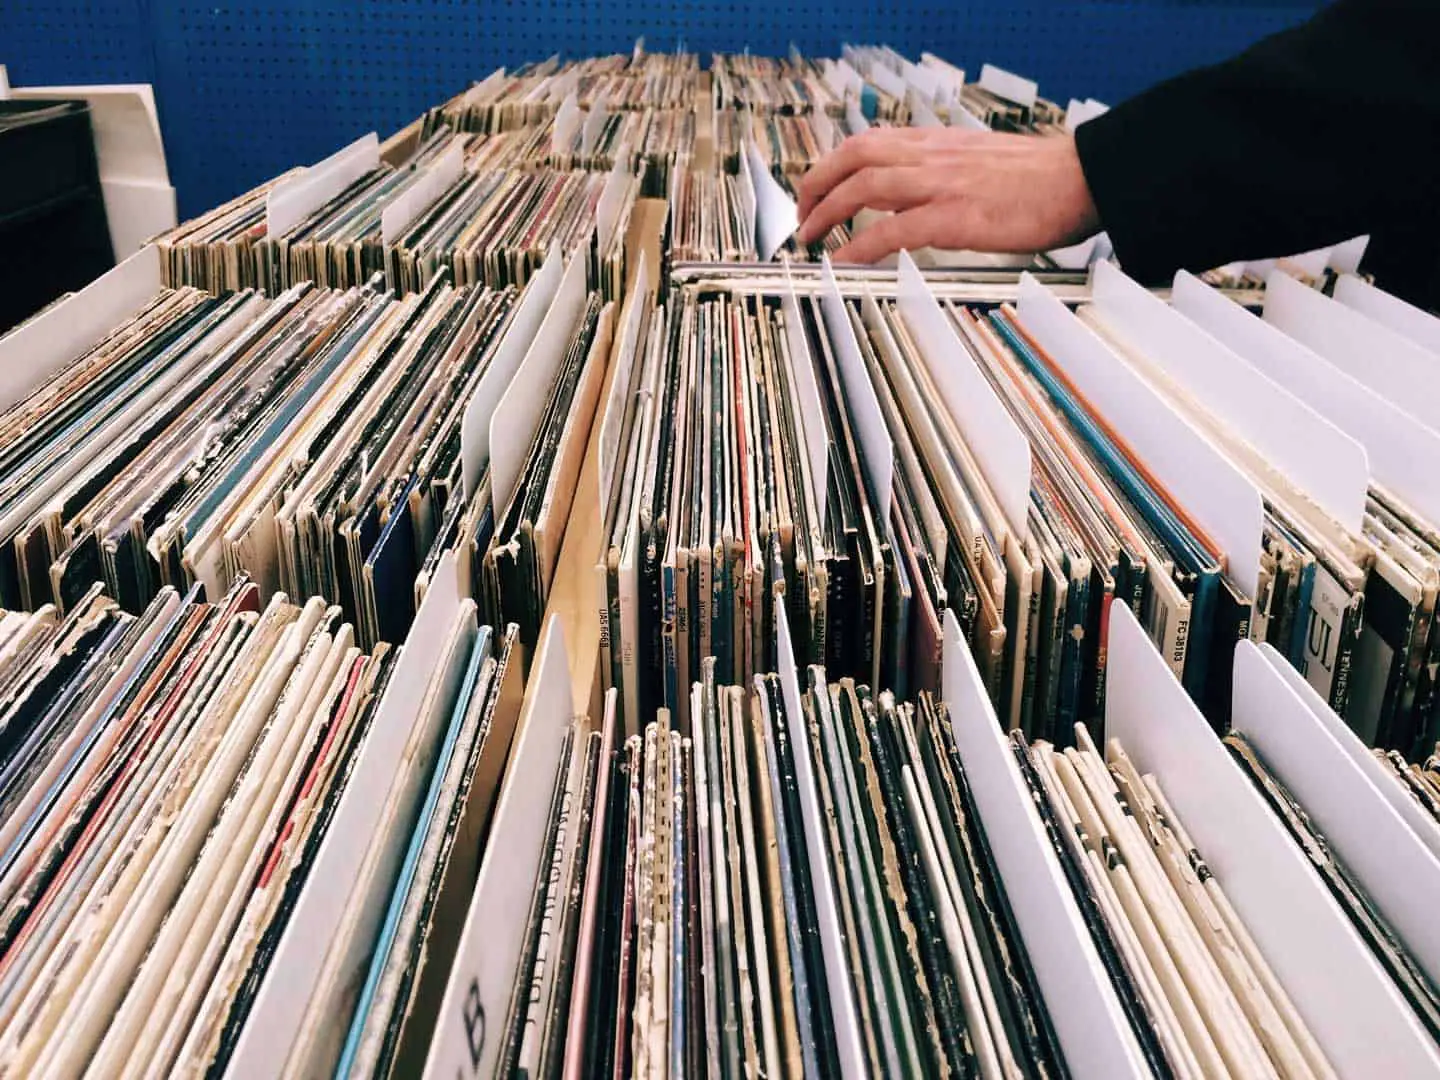 How To Store Vinyl Records Properly